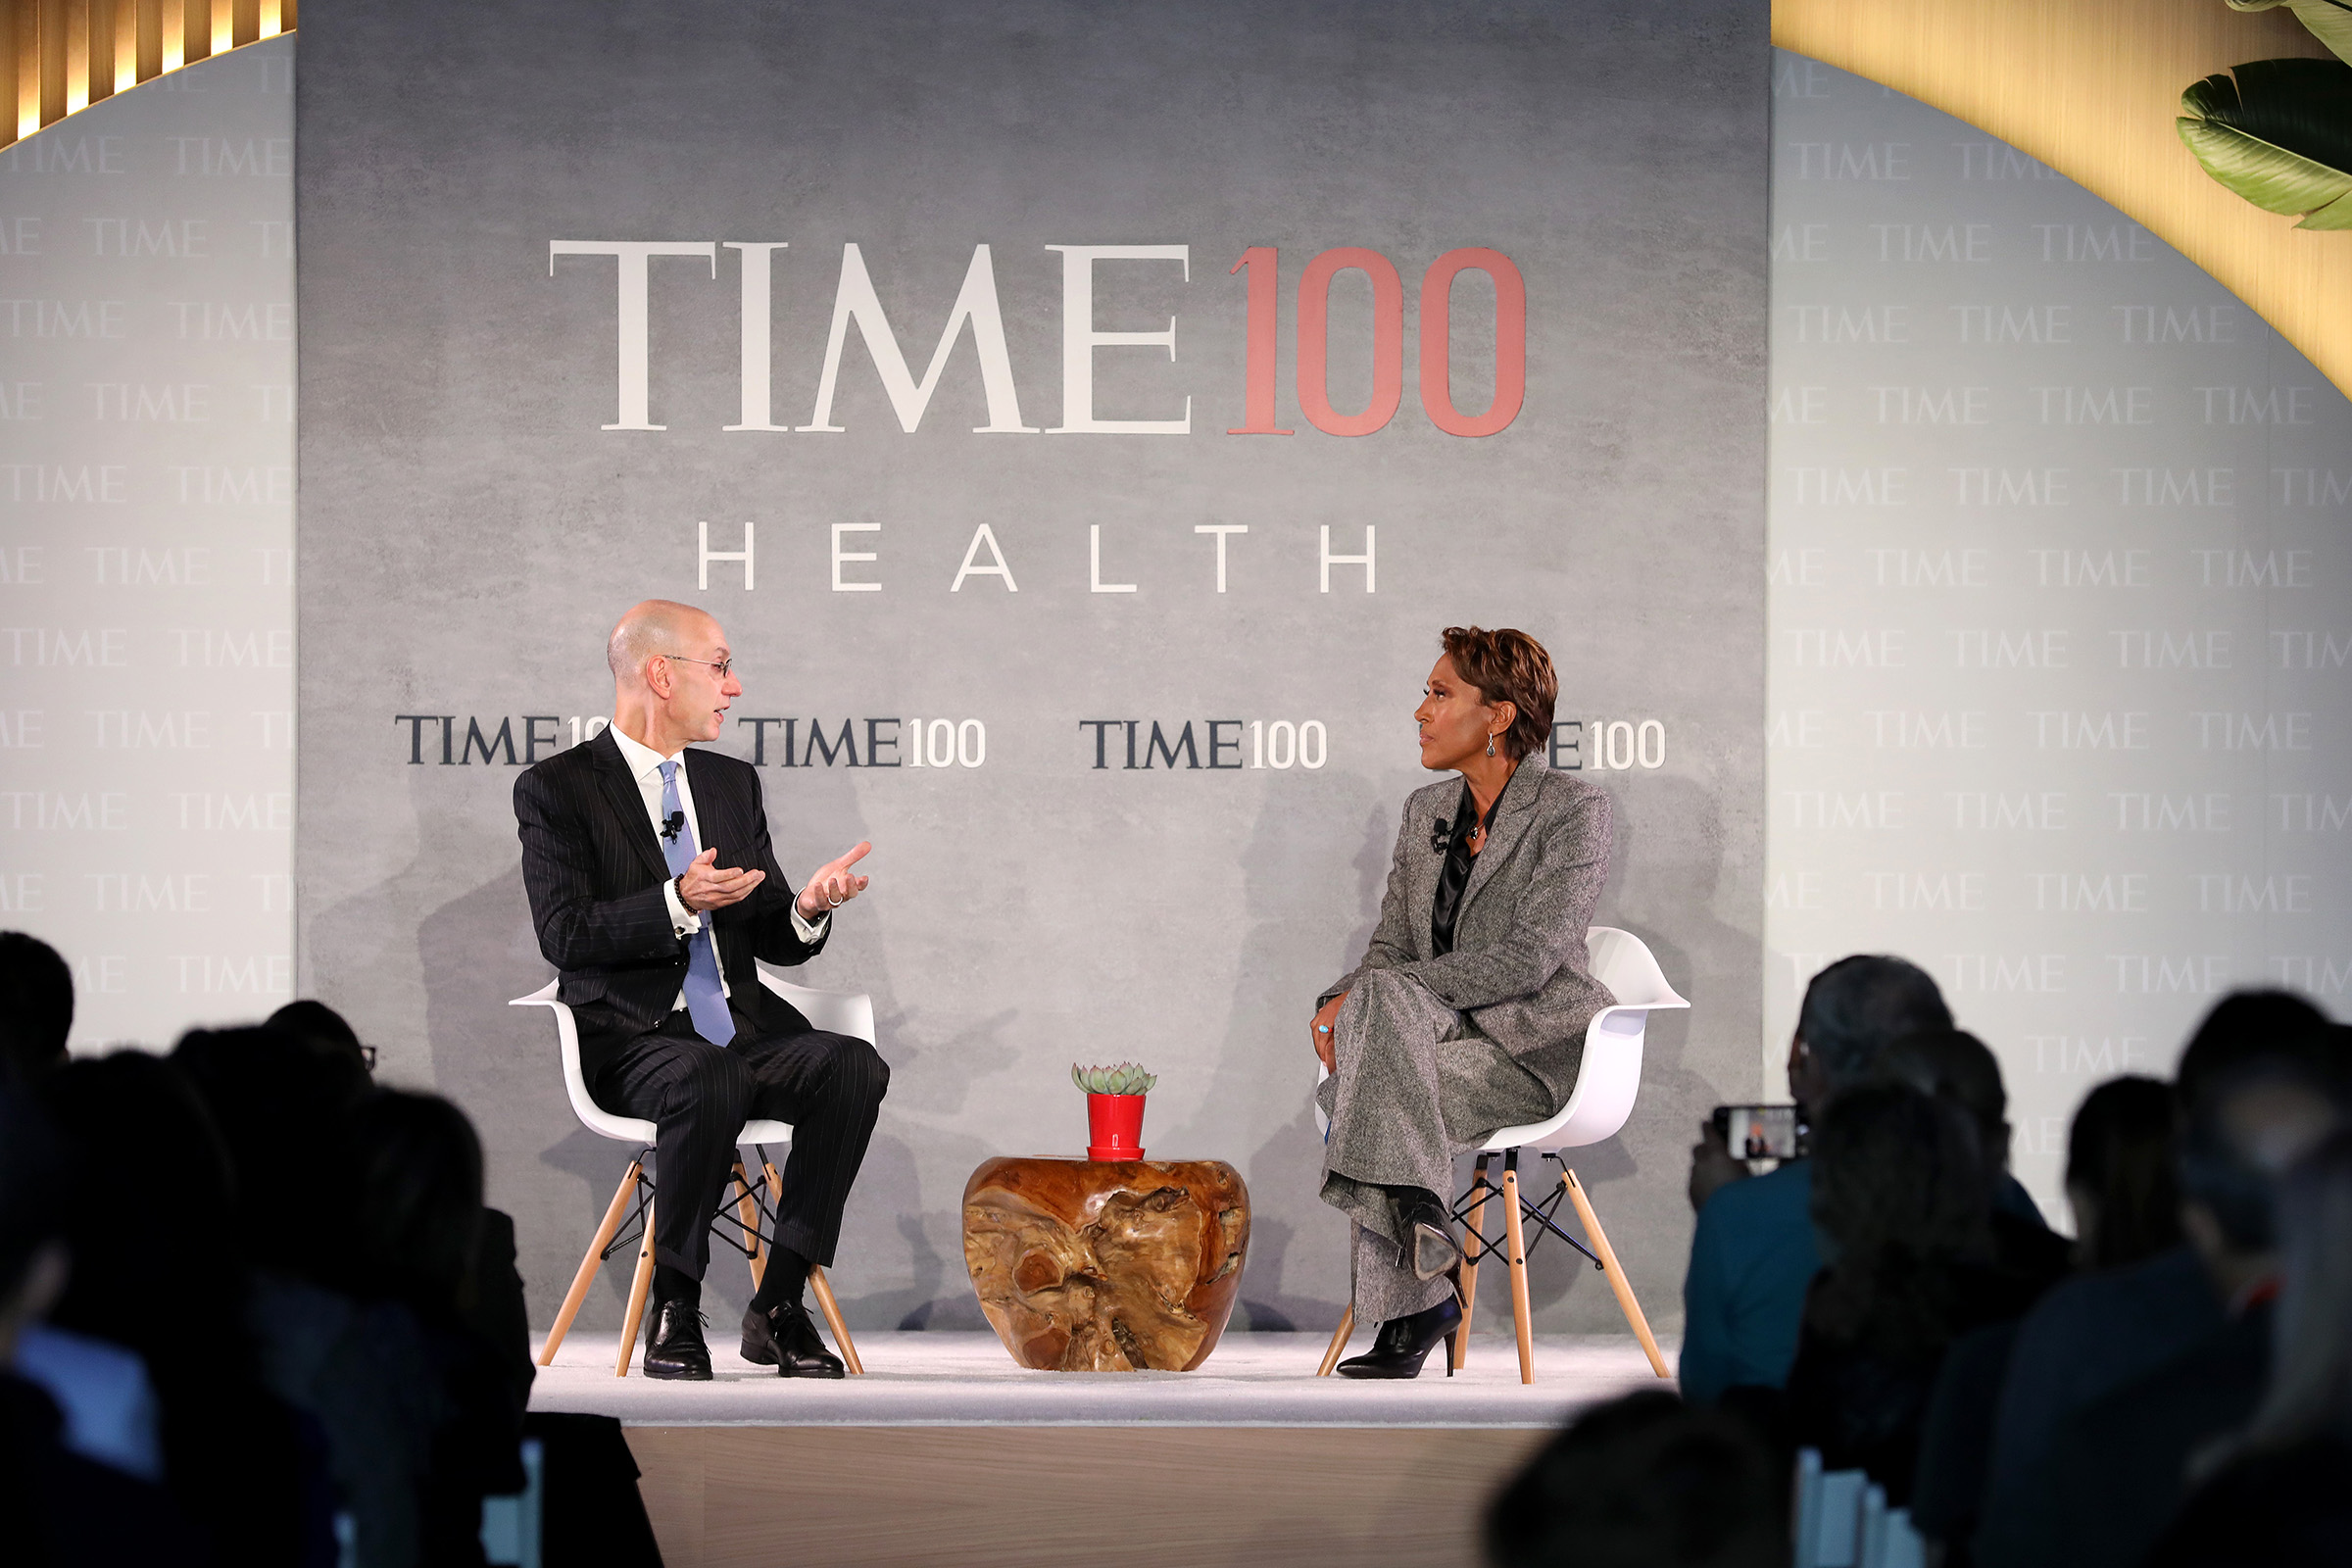 Commissioner of the NBA, Adam Silver (L), speaks with news broadcaster, Robin Roberts, onstage during the TIME 100 Health Summit at Pier 17 in New York City on Oct. 17, 2019. (Cindy Ord—Getty Images for TIME 100 Health)